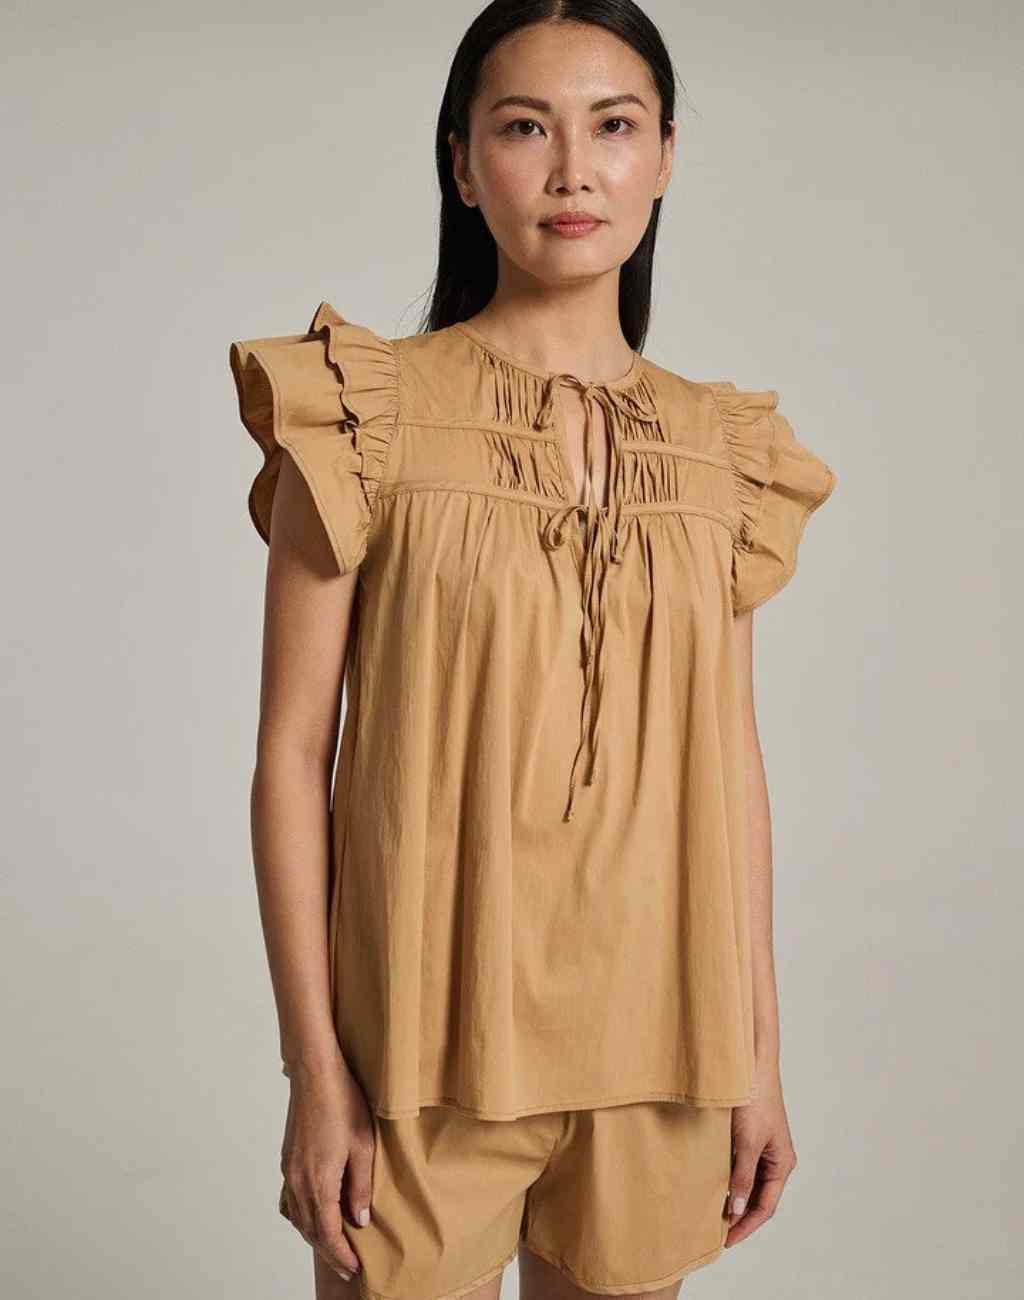 Kunzitis Blouse with Tiered Flutter Sleeves, Pintuck Details and Ties | Beige or White